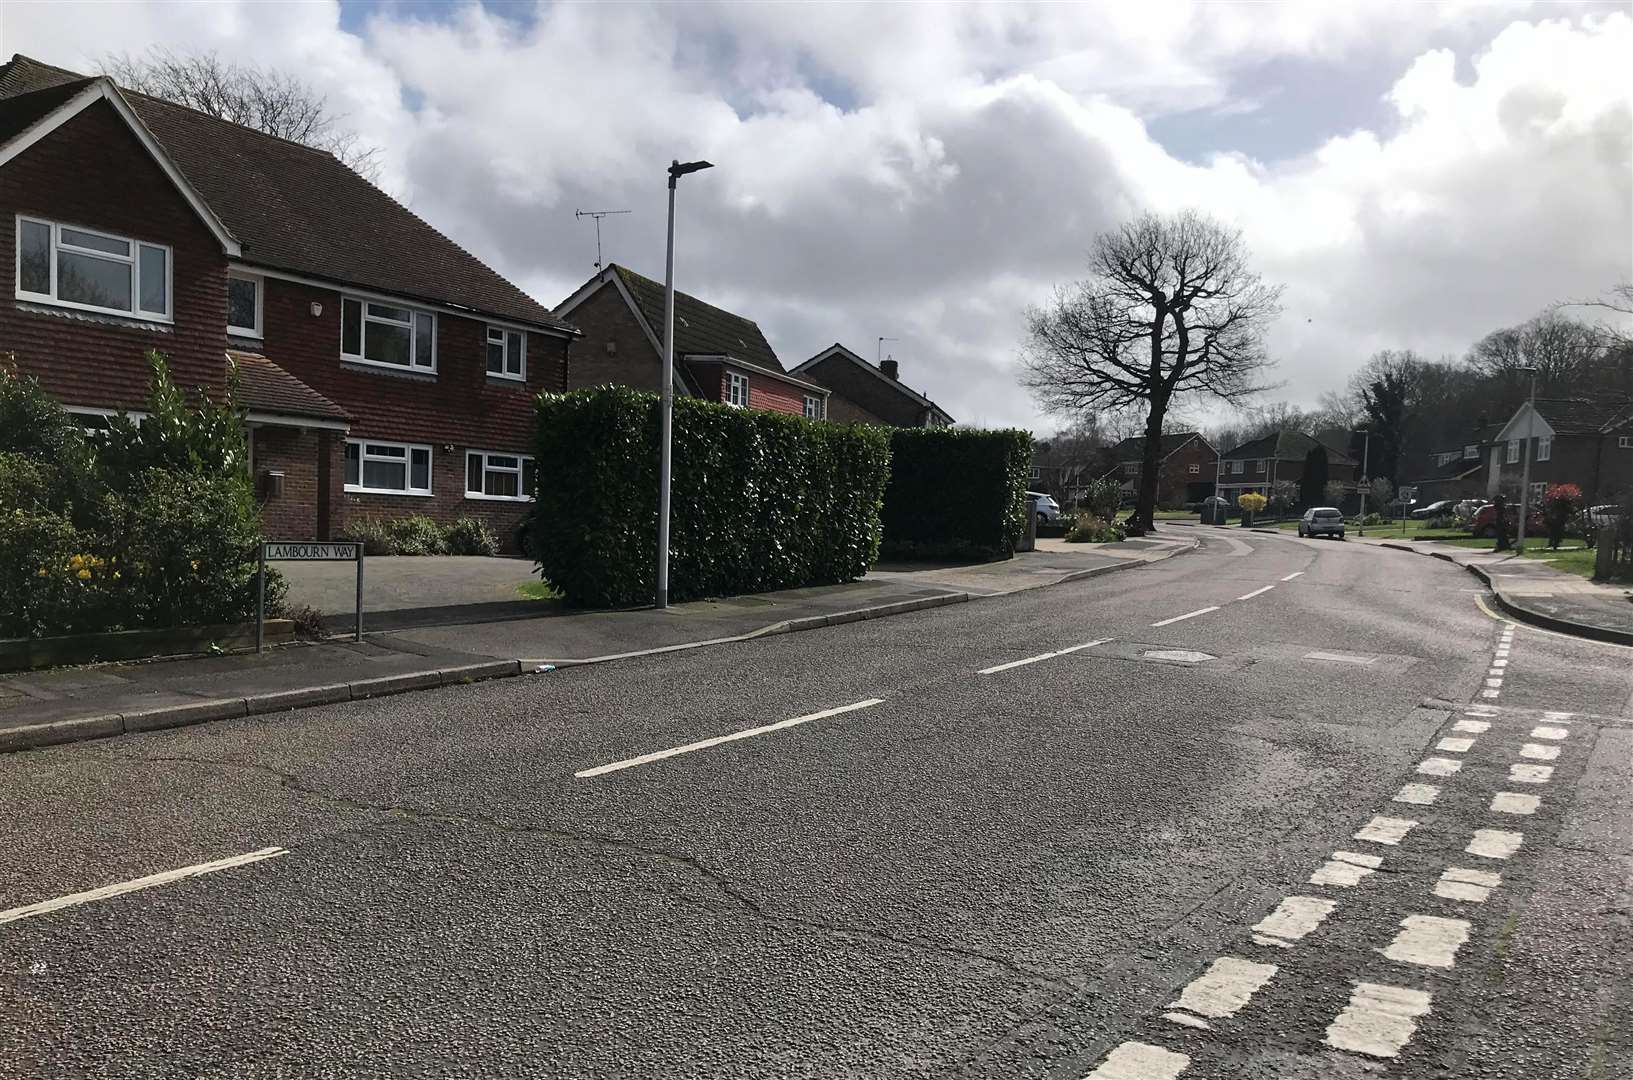 Knole Road to Lambourn Way suffers badly with non-residential traffic, according to resident John Walsh